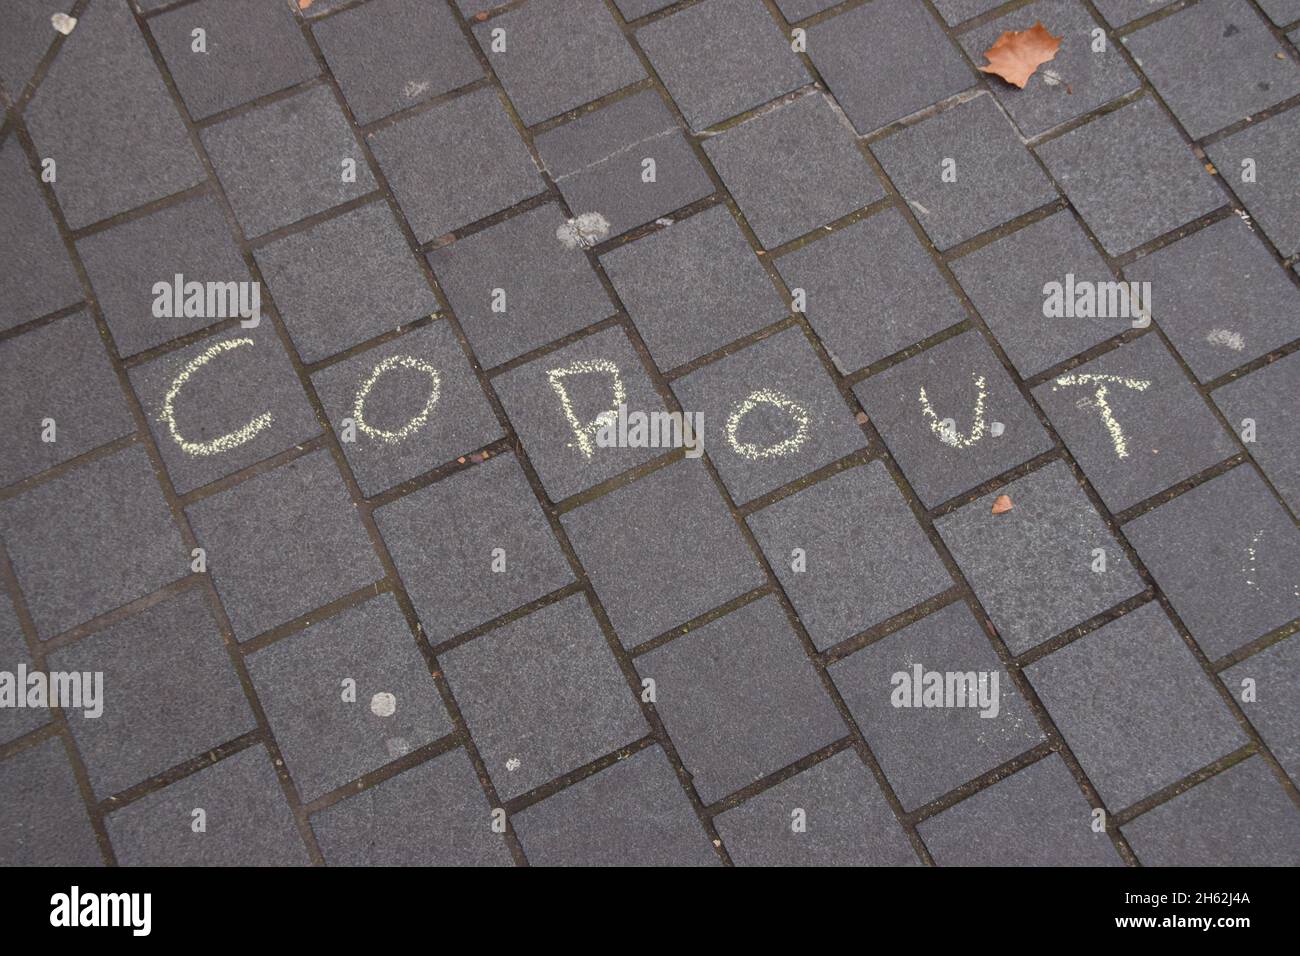 London, UK. 12th Nov, 2021. 'Copout' is seen written in chalk on the pavement outside the Science Museum during the demonstration.Extinction Rebellion demonstrators gathered outside the Science Museum in South Kensington, as part of their ongoing protests against sponsorship of the museum by fossil fuel companies Shell and Adani. (Photo by Vuk Valcic/SOPA Images/Sipa USA) Credit: Sipa USA/Alamy Live News Stock Photo